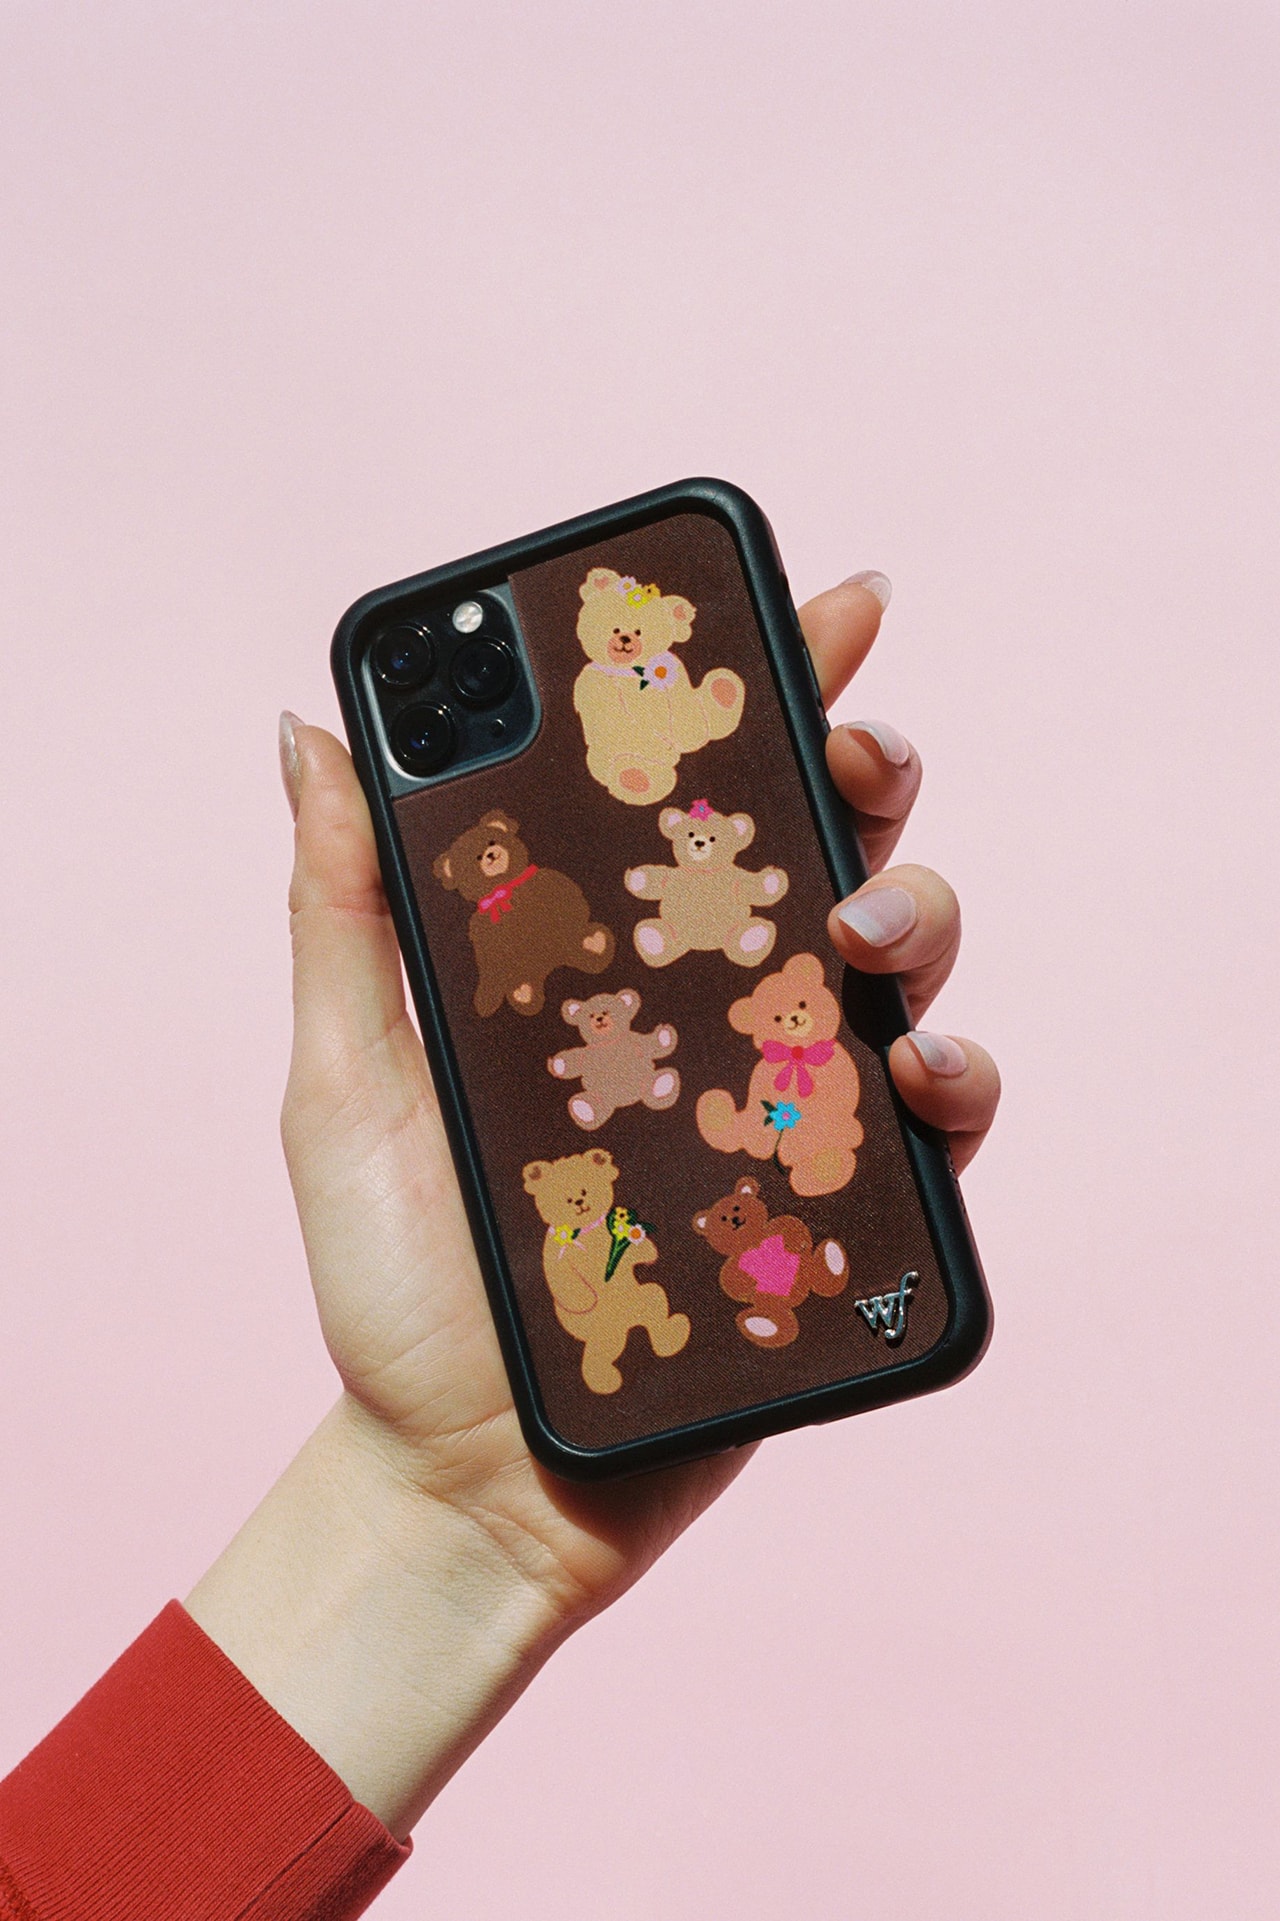 Wildflower Cases Bear-y Cute iPhone Cases Valentine's Day Teddy Bear Phone Lookbook Campaign